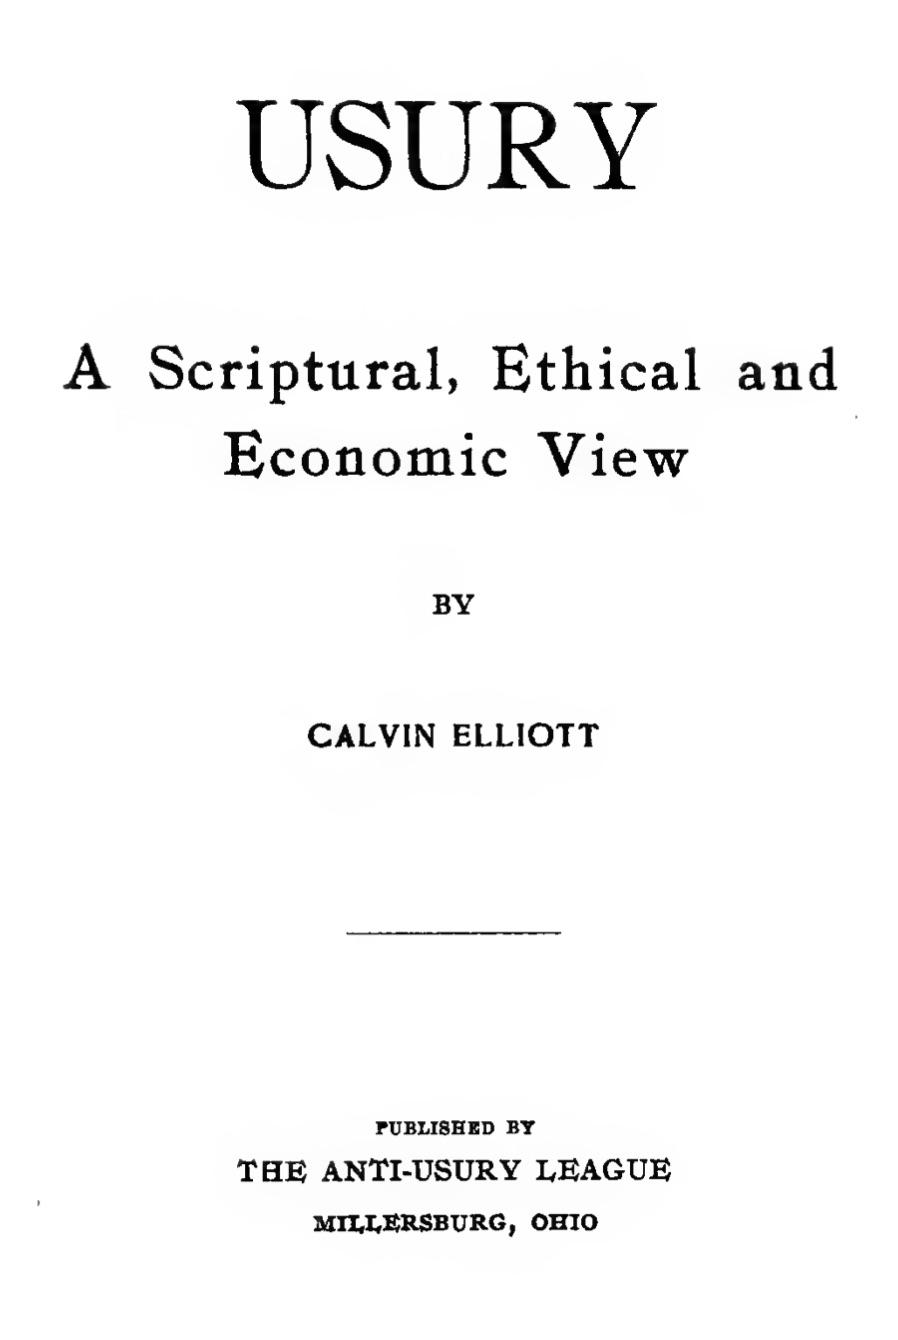 Usury; A Scriptural, Ethical and Economic View (1902) by Calvin Elliott